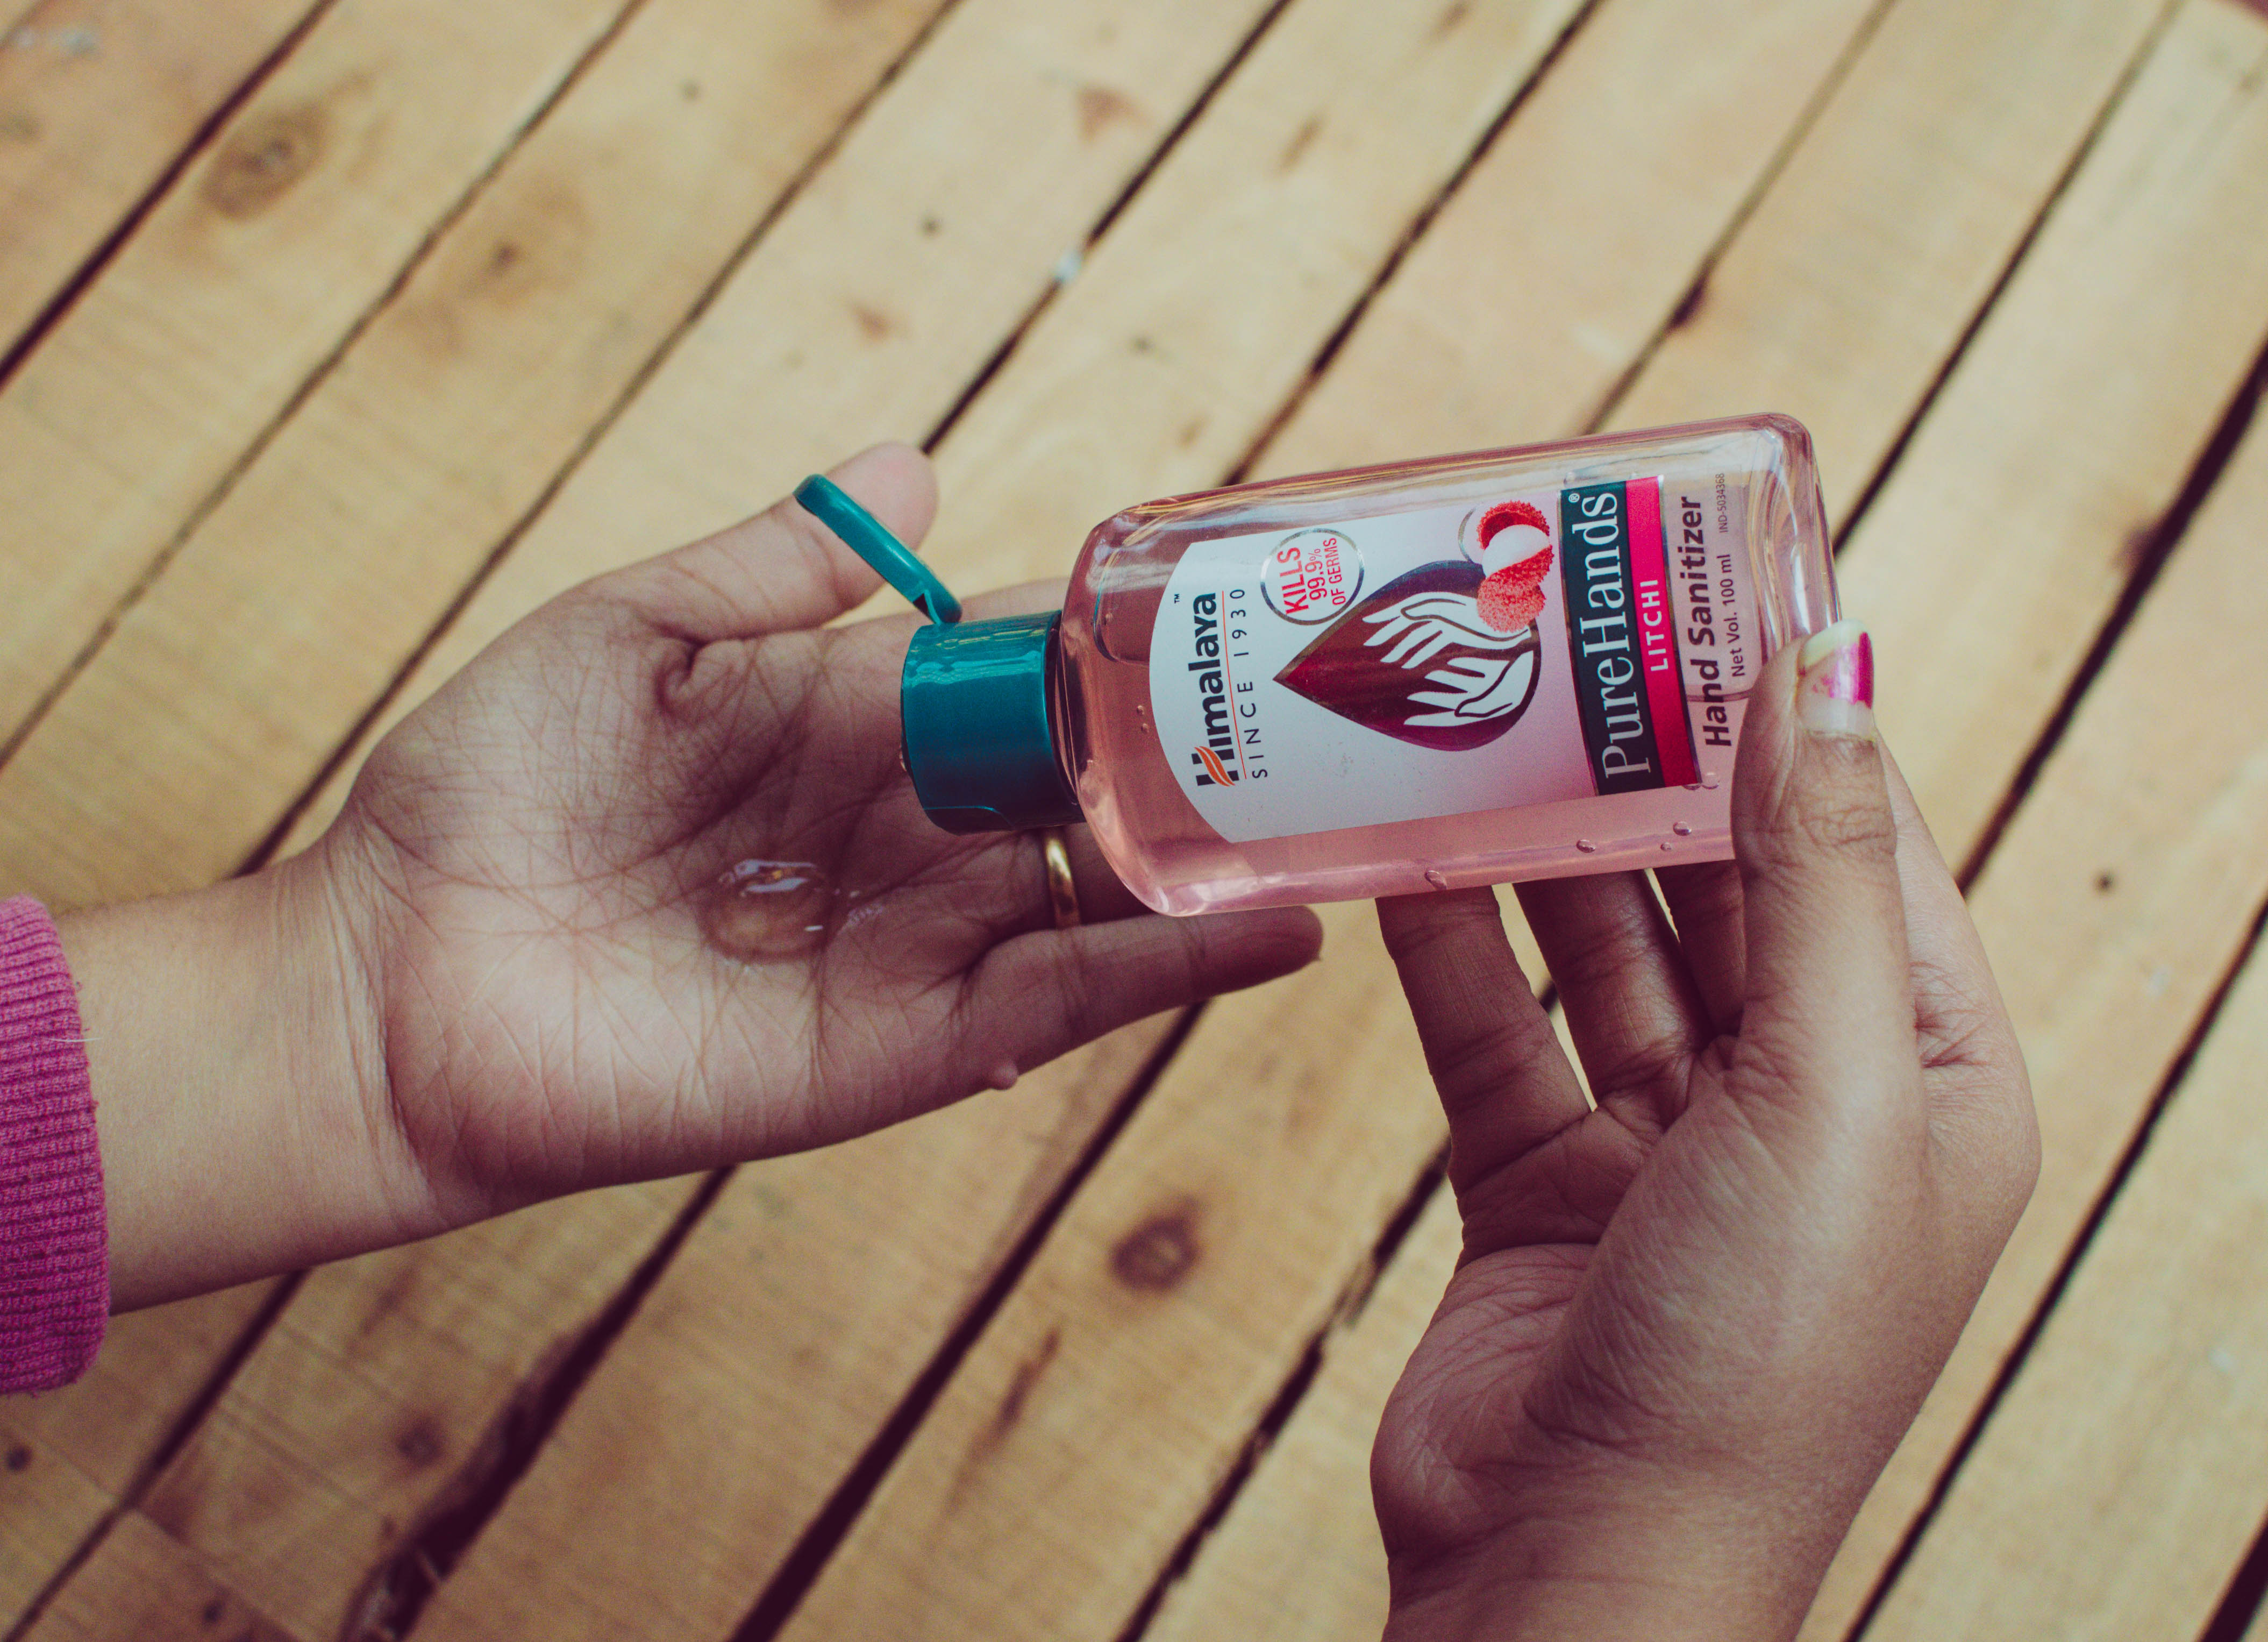 Himalaya PureHands Hand Sanitizers Review | Cherry On Top